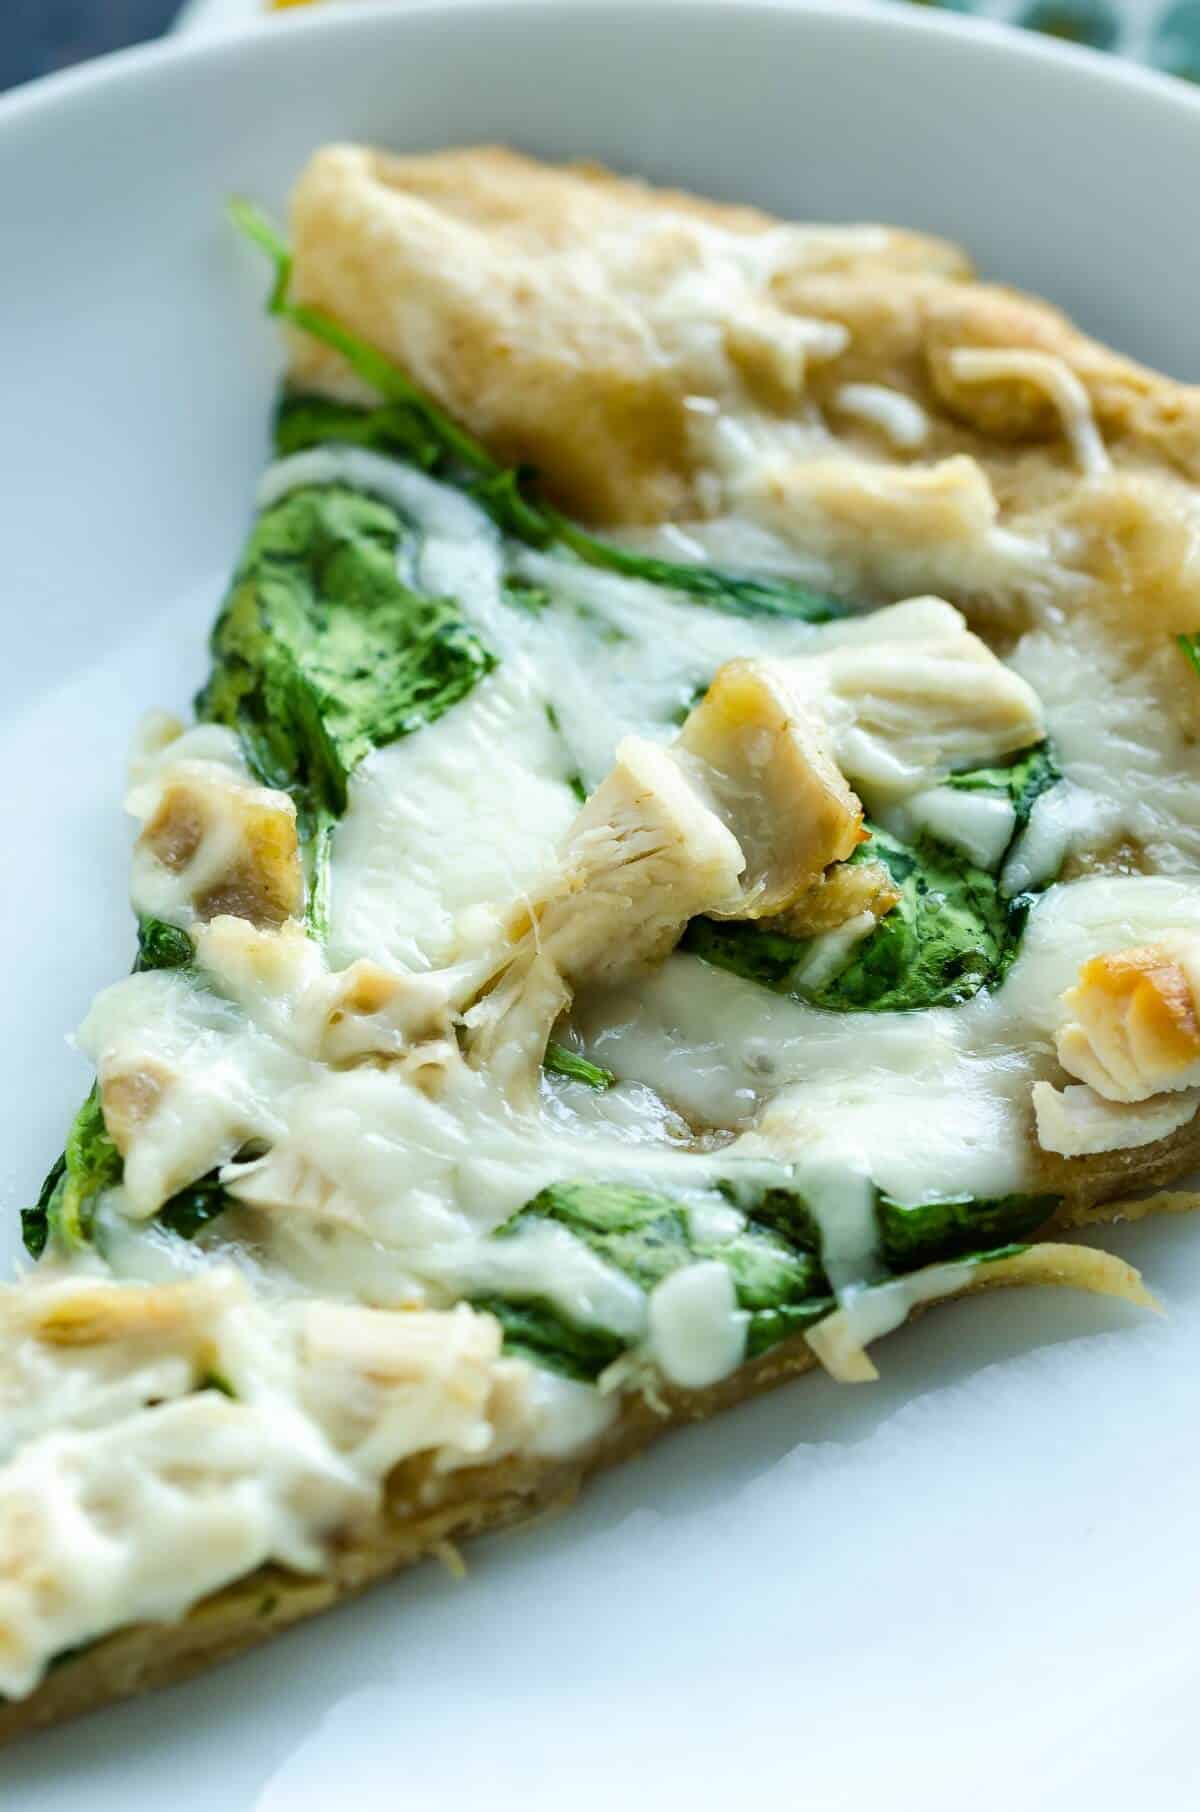 slice of hot homemade white pizza, melty cheese, chunks of chicken and spinach leaves